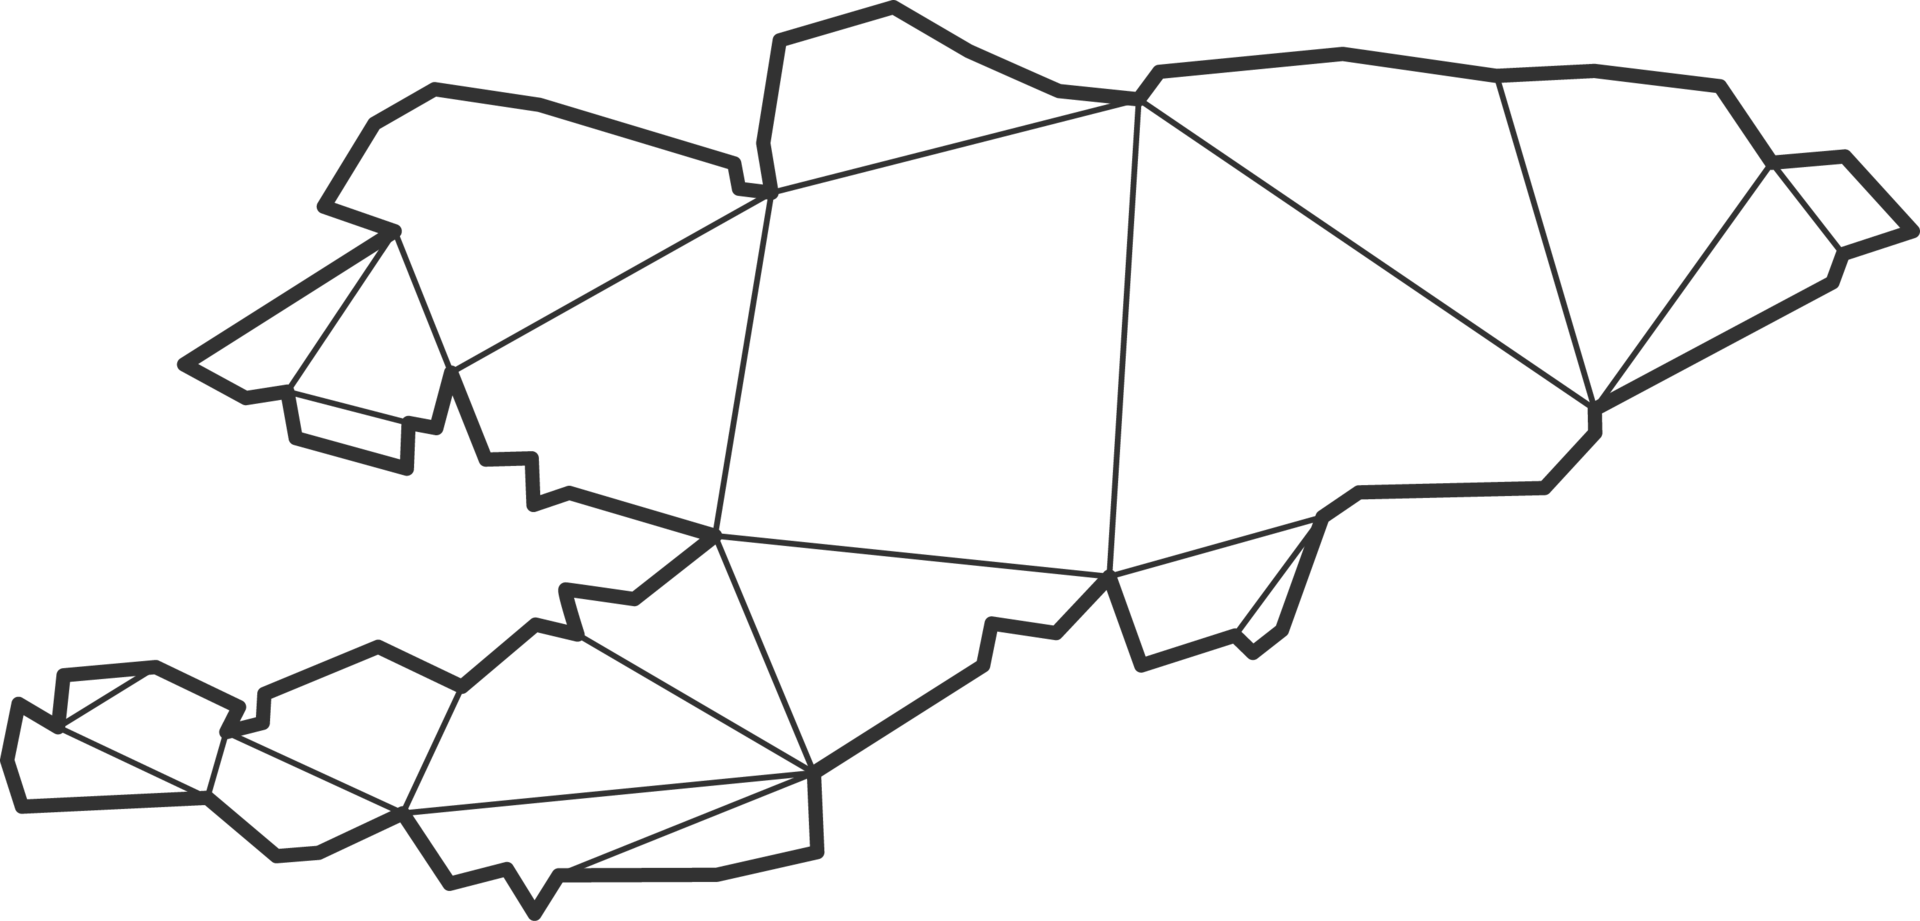 Mosaic triangles map style of Kyrgyzstan. png